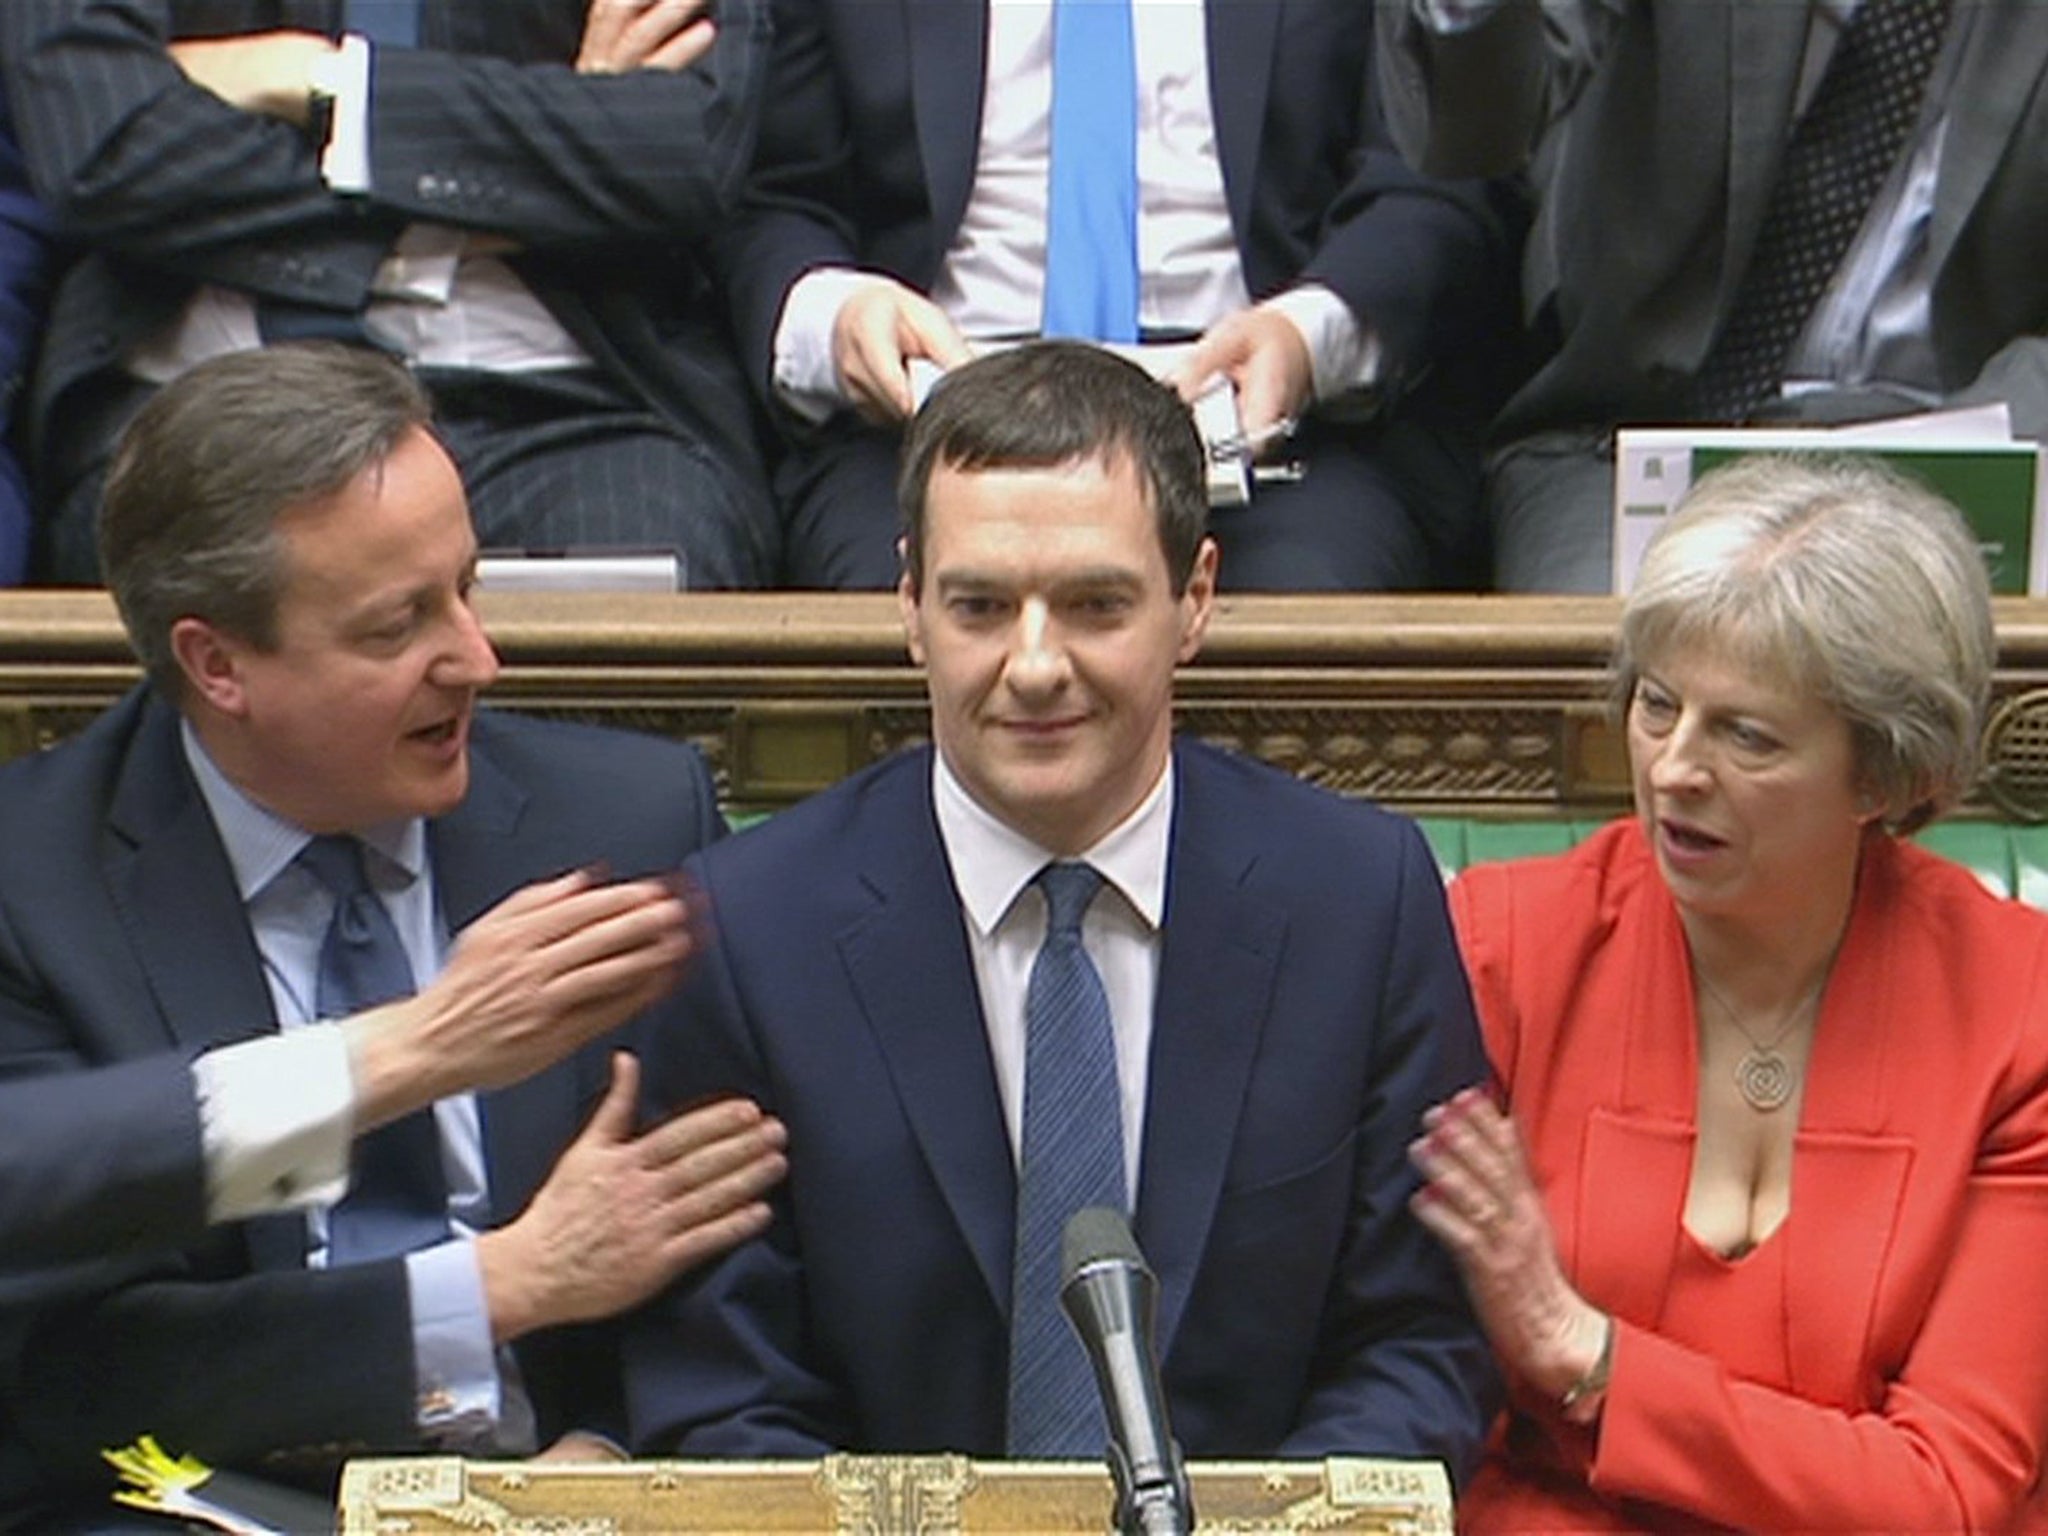 Britain's Chancellor of the Exchequer George Osborne takes his seat after delivering his Budget to the House of Commons